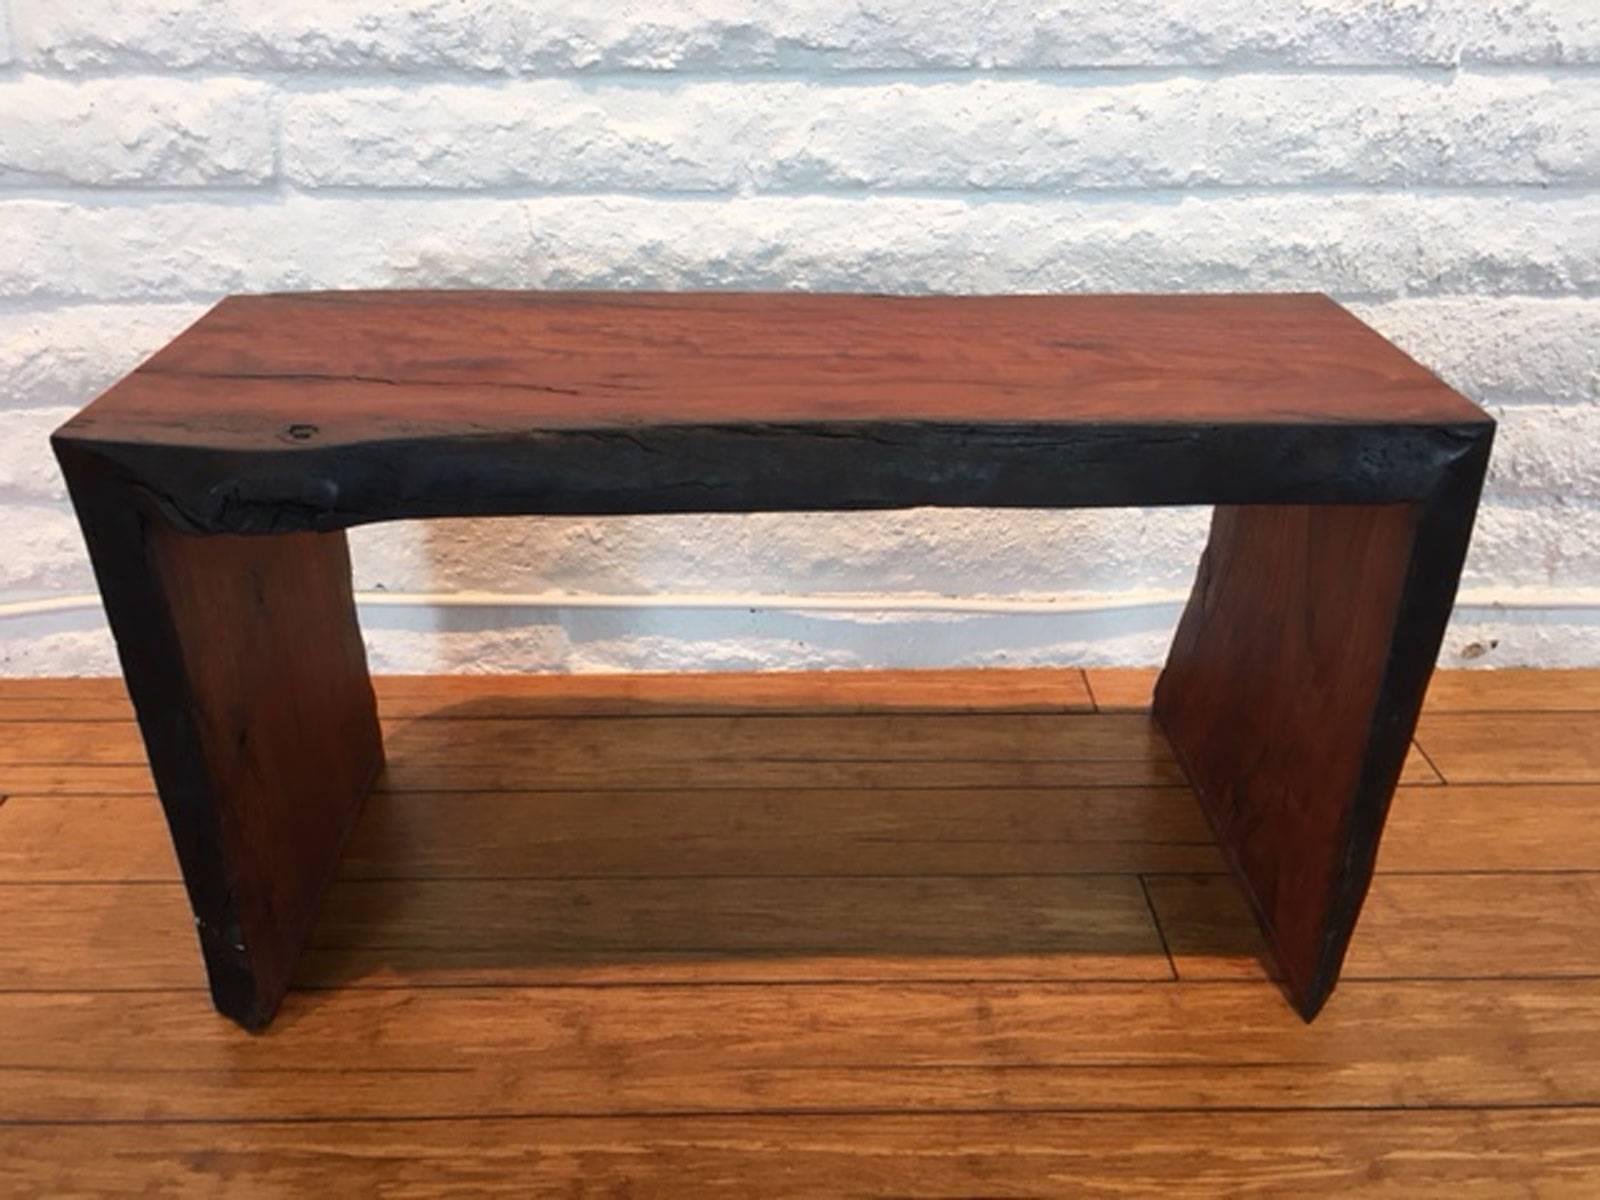 Short eucalyptus wood bench designed, produced and made by master wood artist and designer Scott Mills who only uses reclaimed (deadfall or storm downed trees) in the pieces he designs and produces. Appropriate for home or commercial use. No veneer.